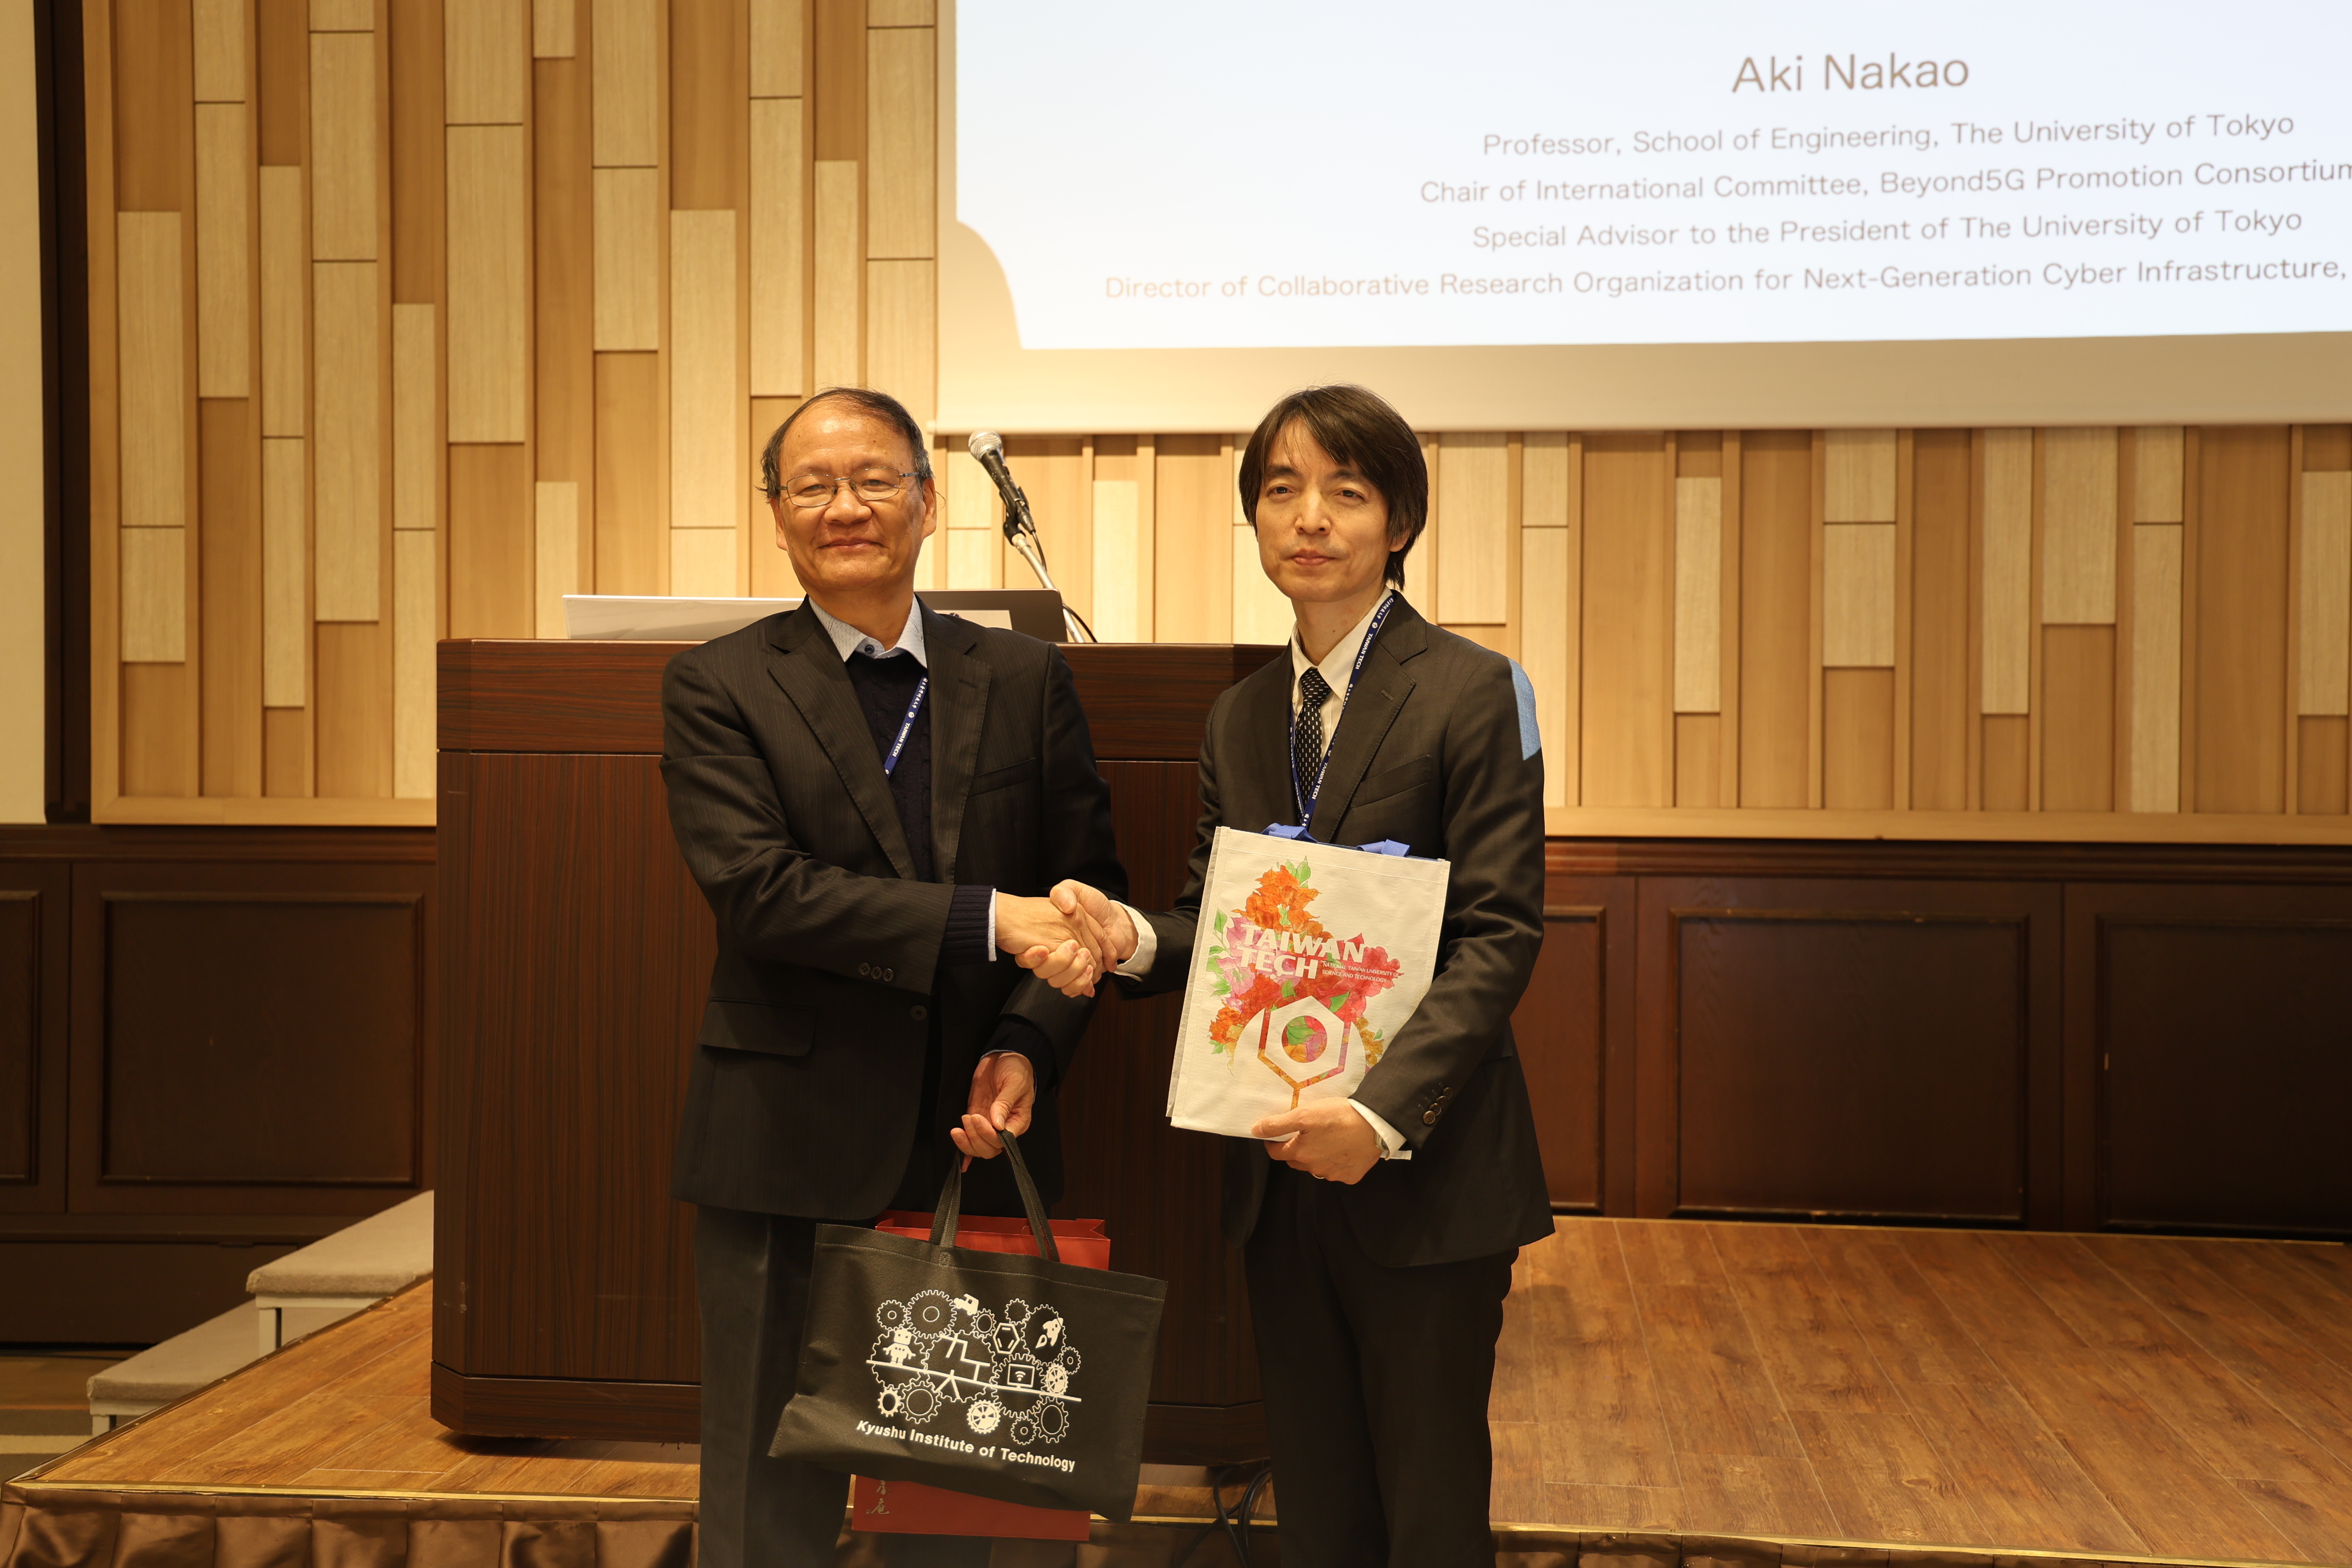 Dean Jiann-Liang Chen (left) of the College of Electrical Engineering and Computer Science and Akihiro Nakao (right), Director of the Internet of Things (IoT) Network Innovation Research Center at Kyushu Institute of Technology, exchange commemorative gifts.